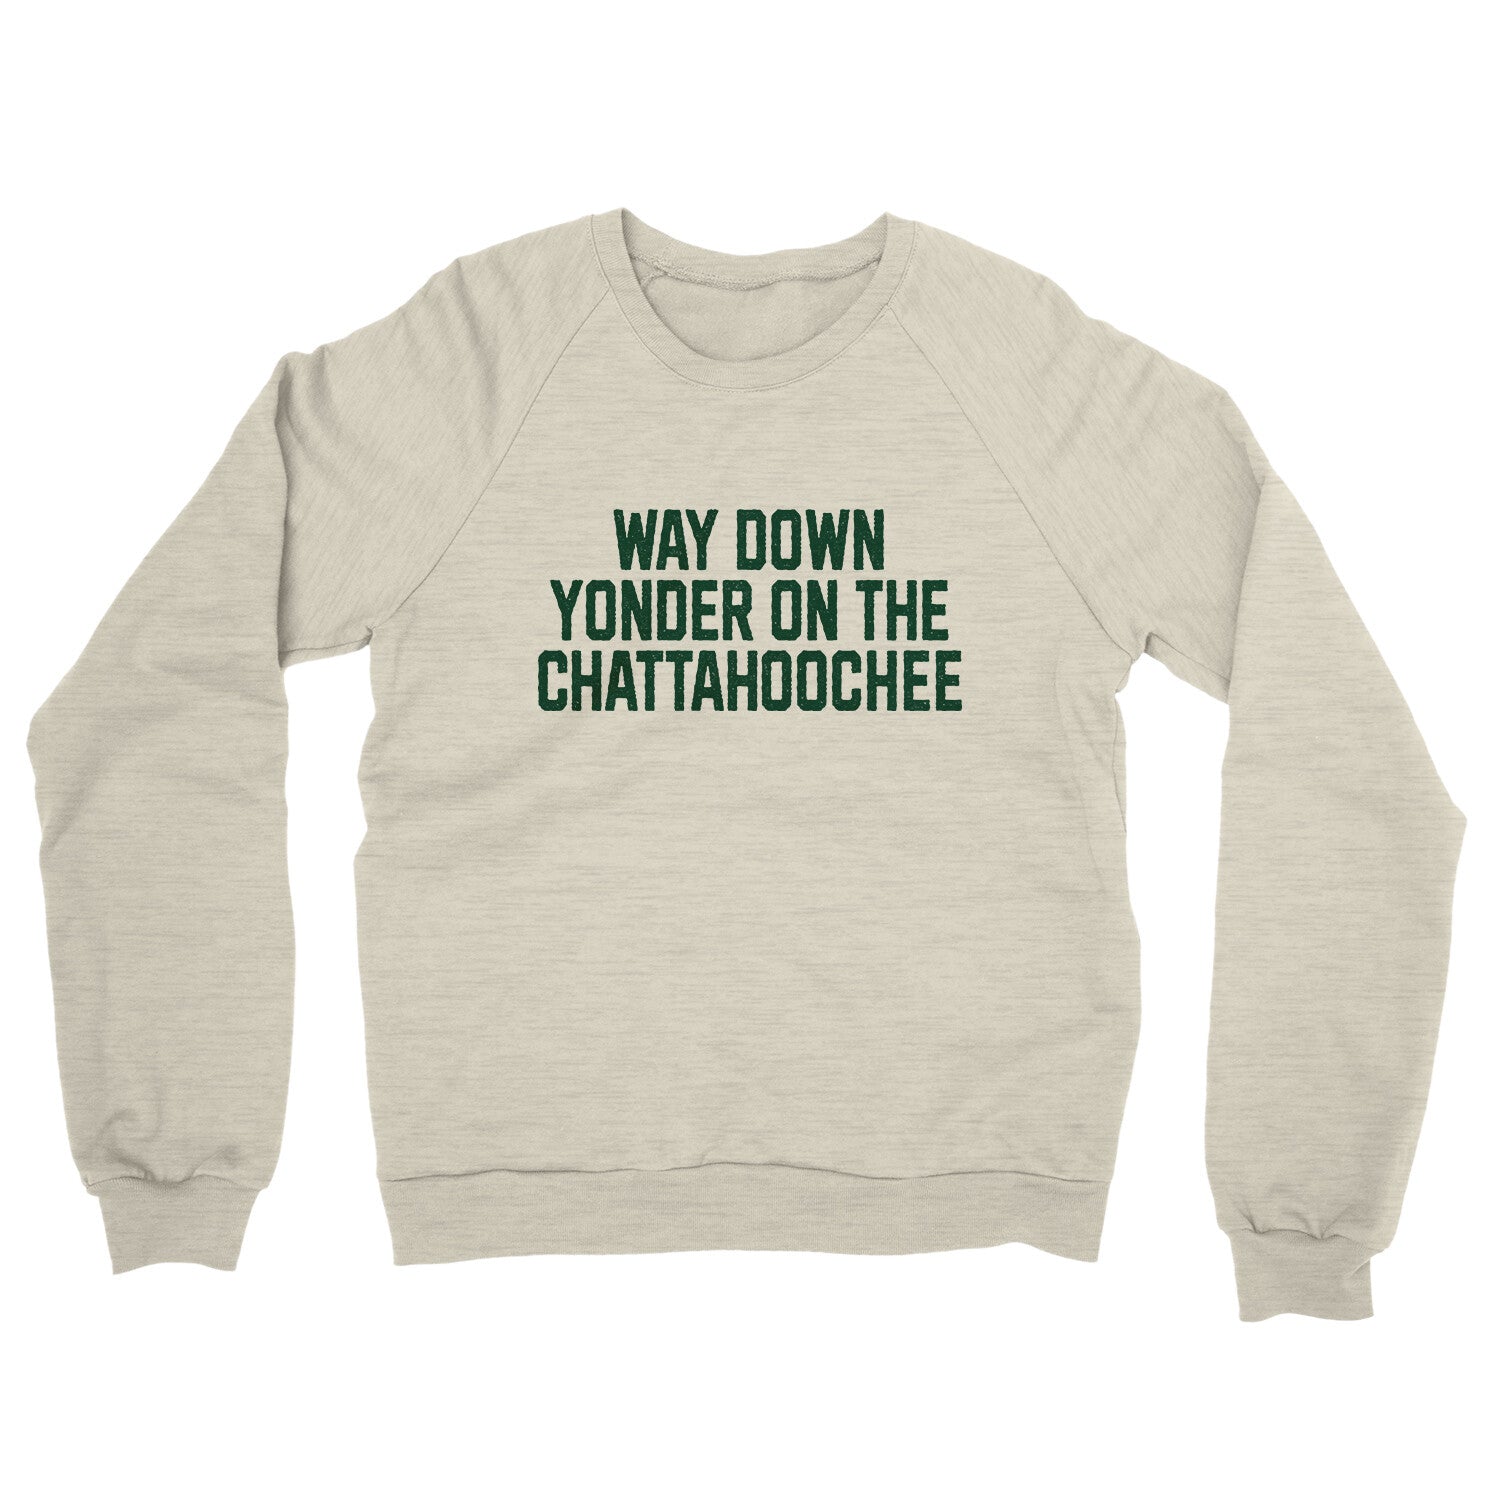 Way Down Yonder on the Chattahoochee in Heather Oatmeal Color